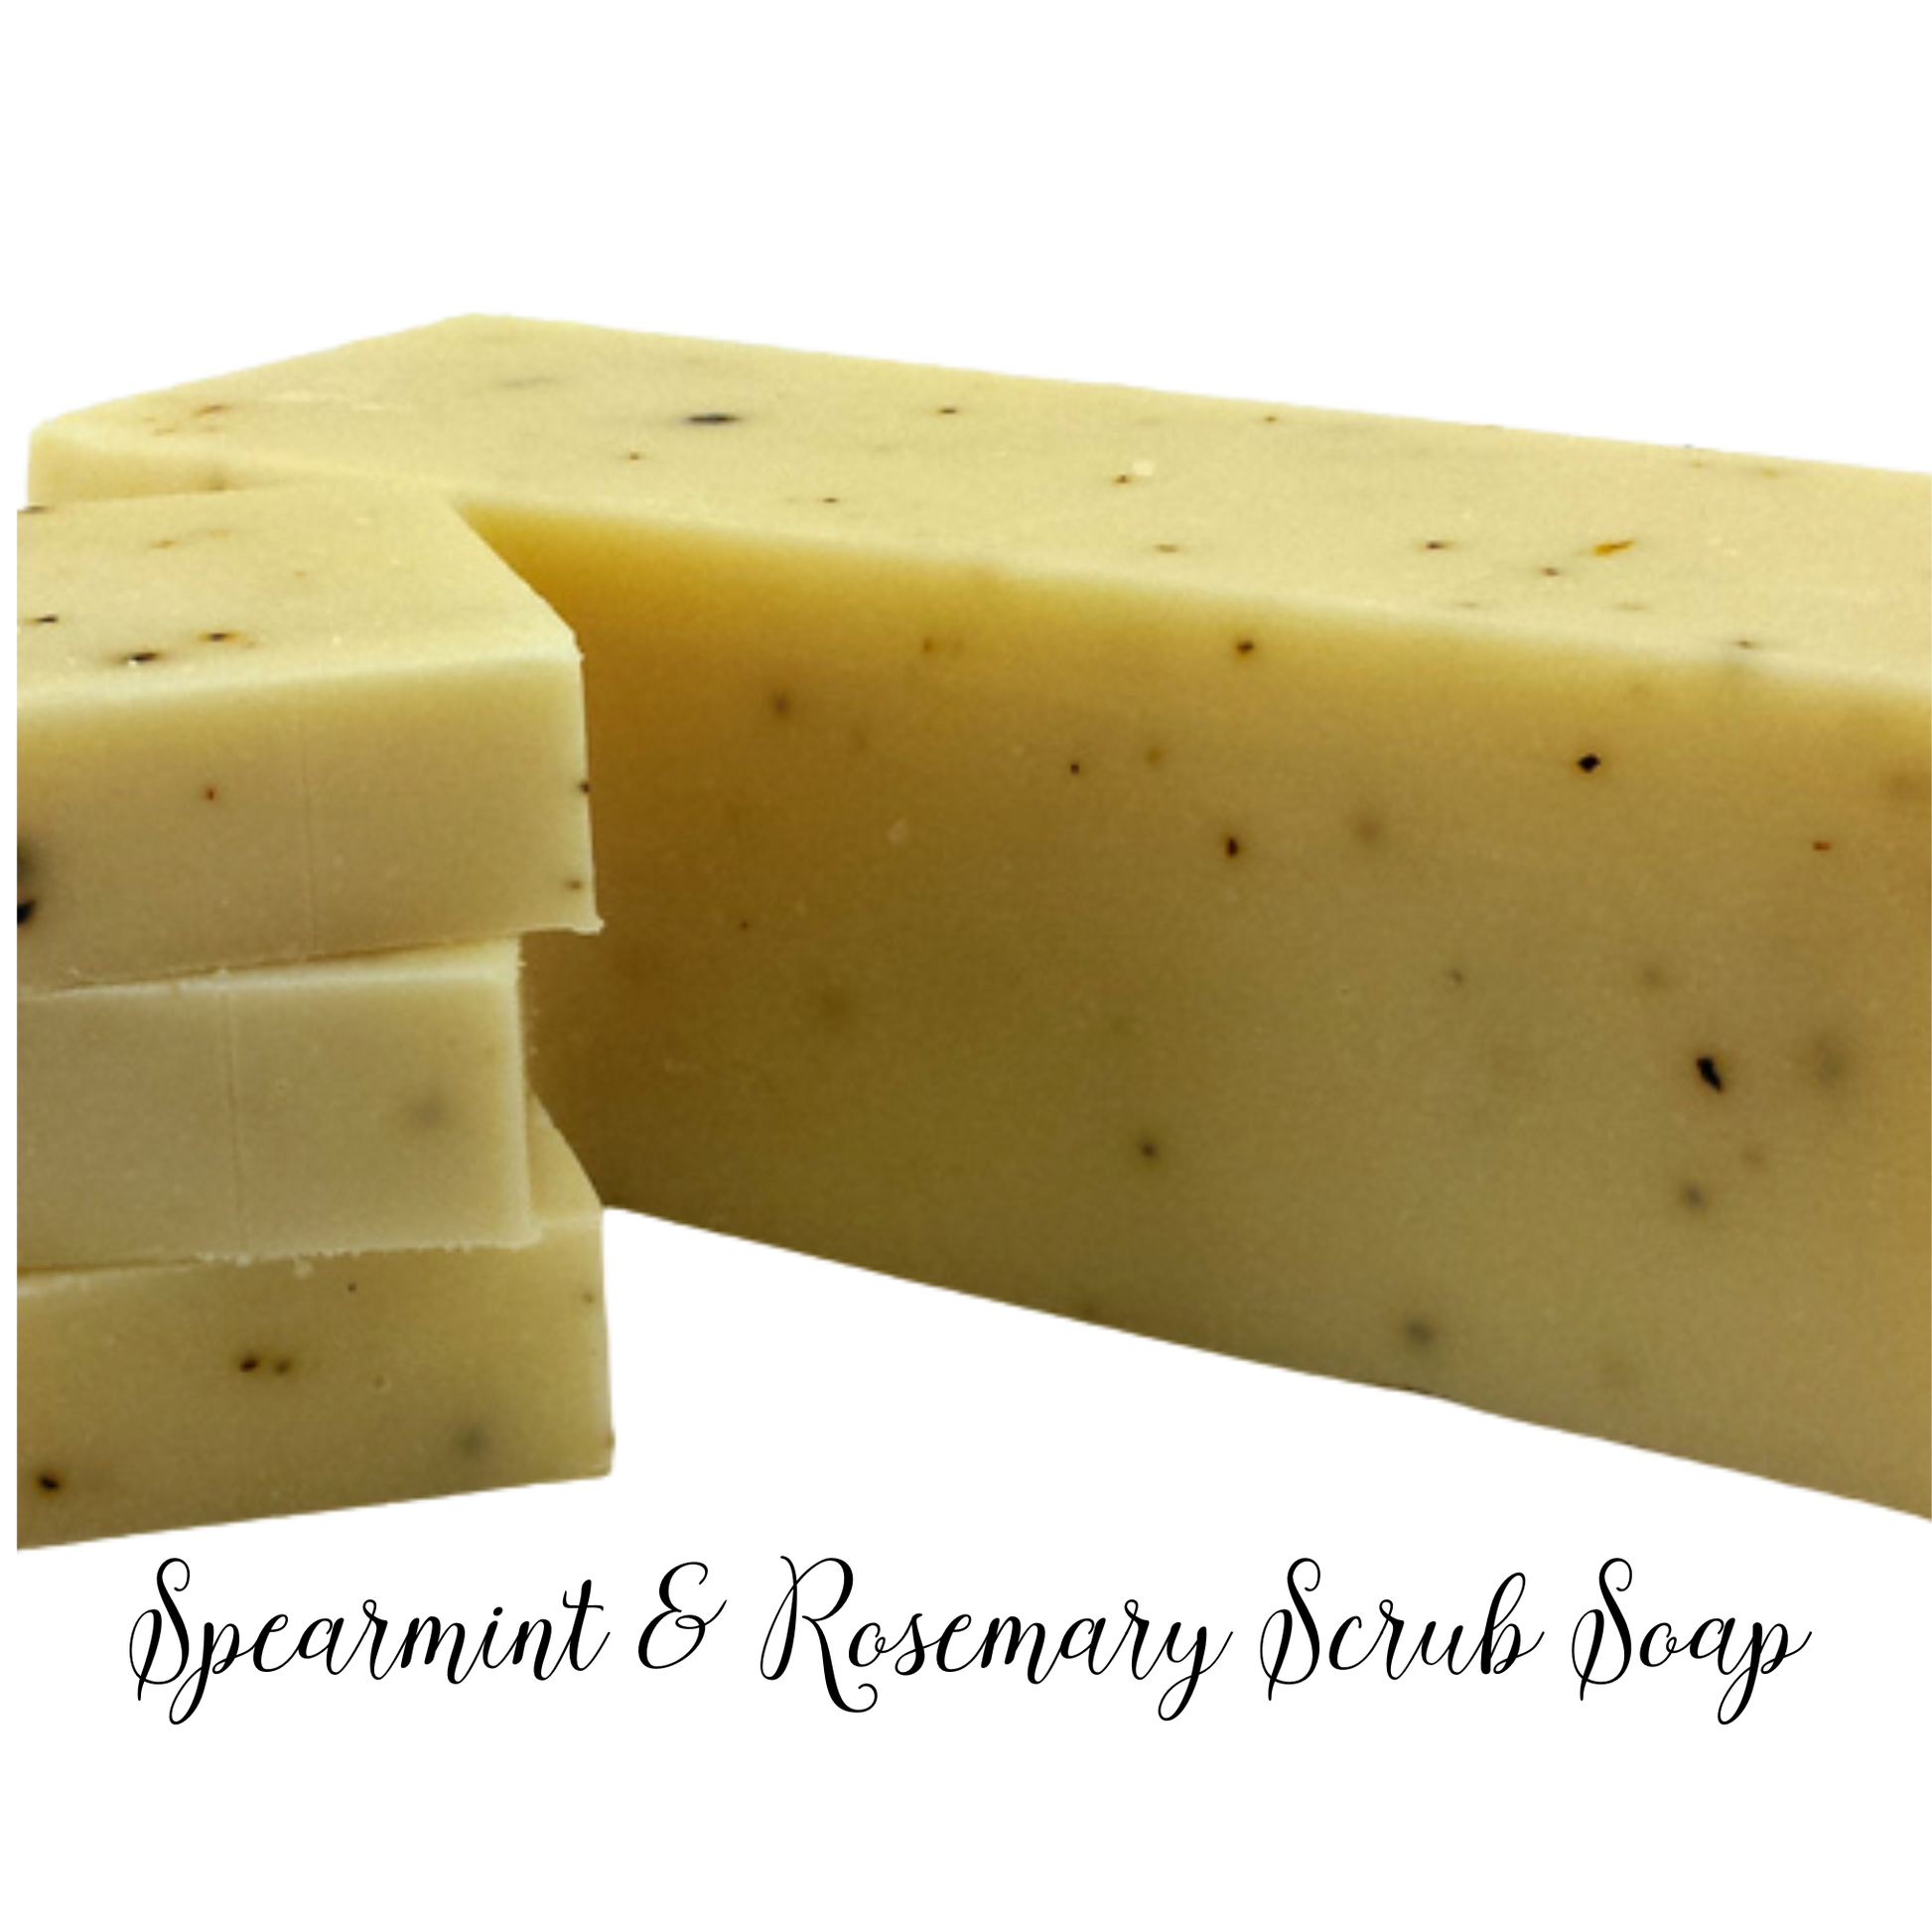 Smells like sweet spearmint oil complimented beautifully by natural rosemary oil. Contains peppermint leaves to exfoliate 4.5 oz soap bar